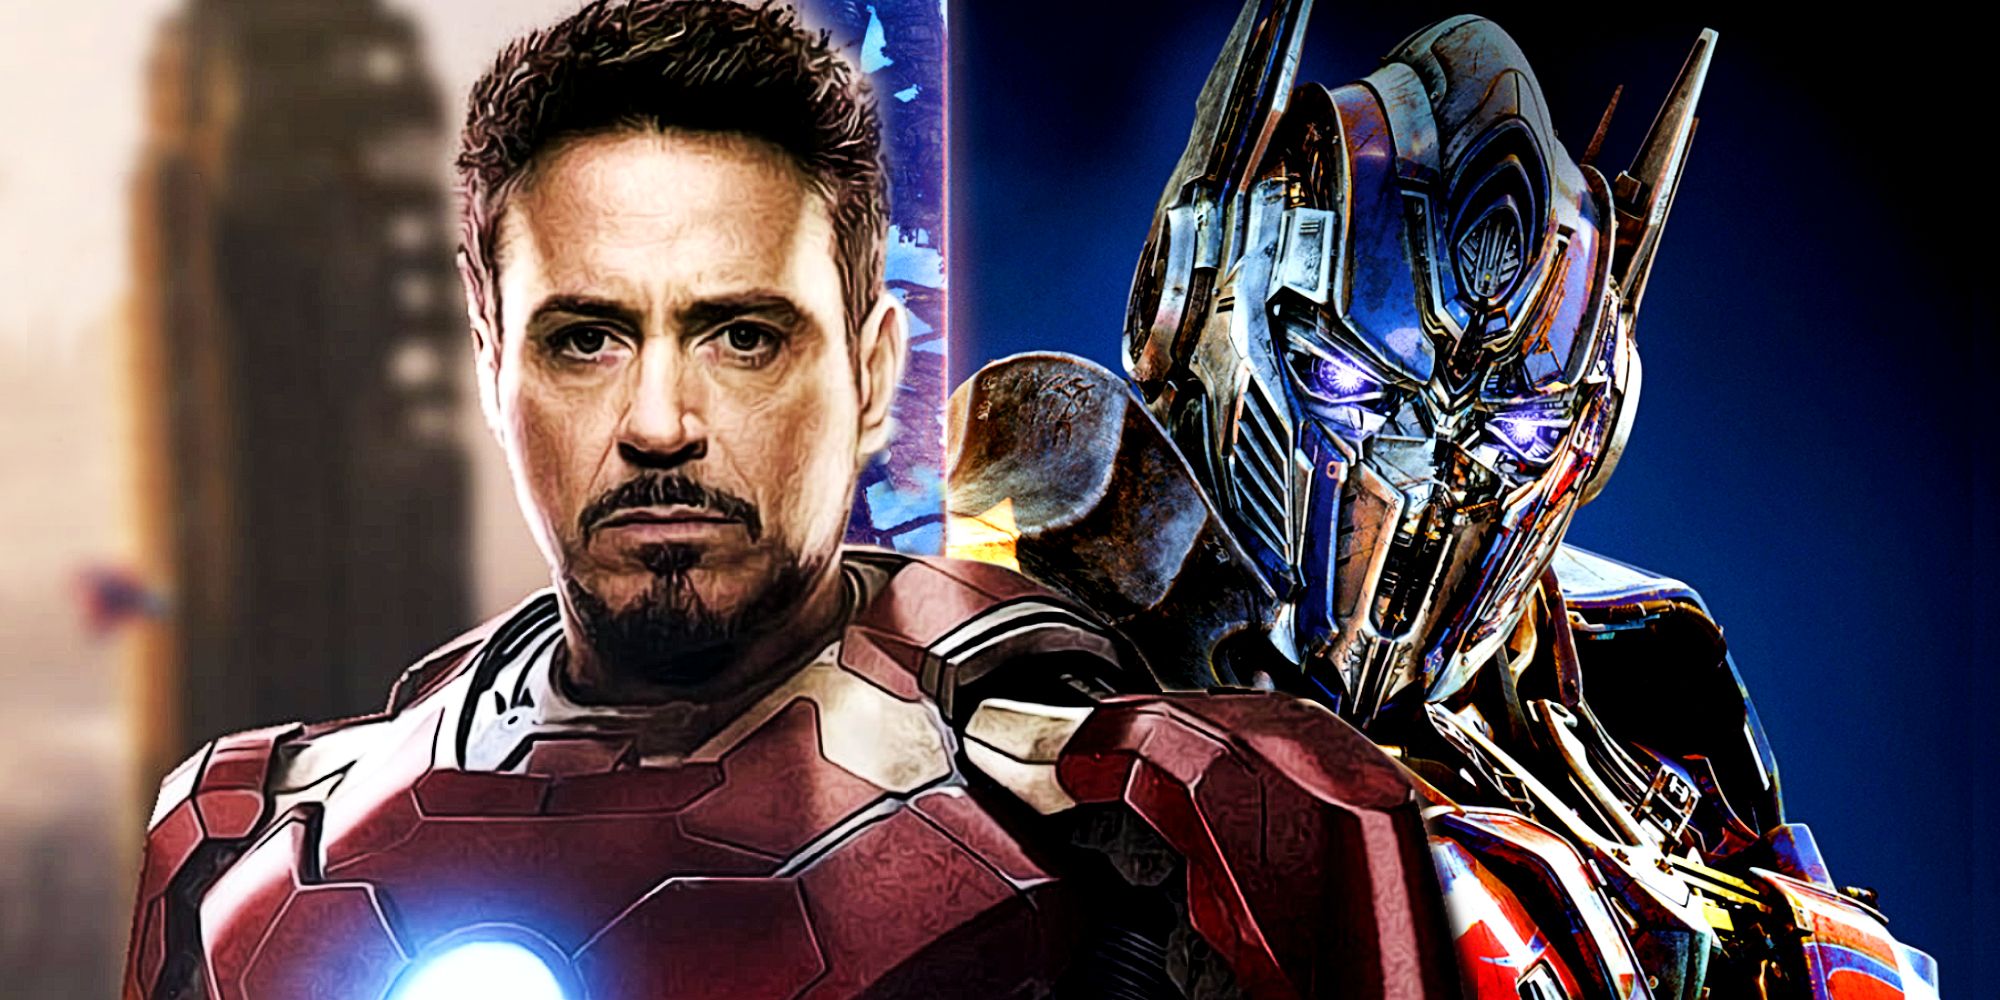 MCU's Iron Man and Transformers' Optimus Prime in Live-Action